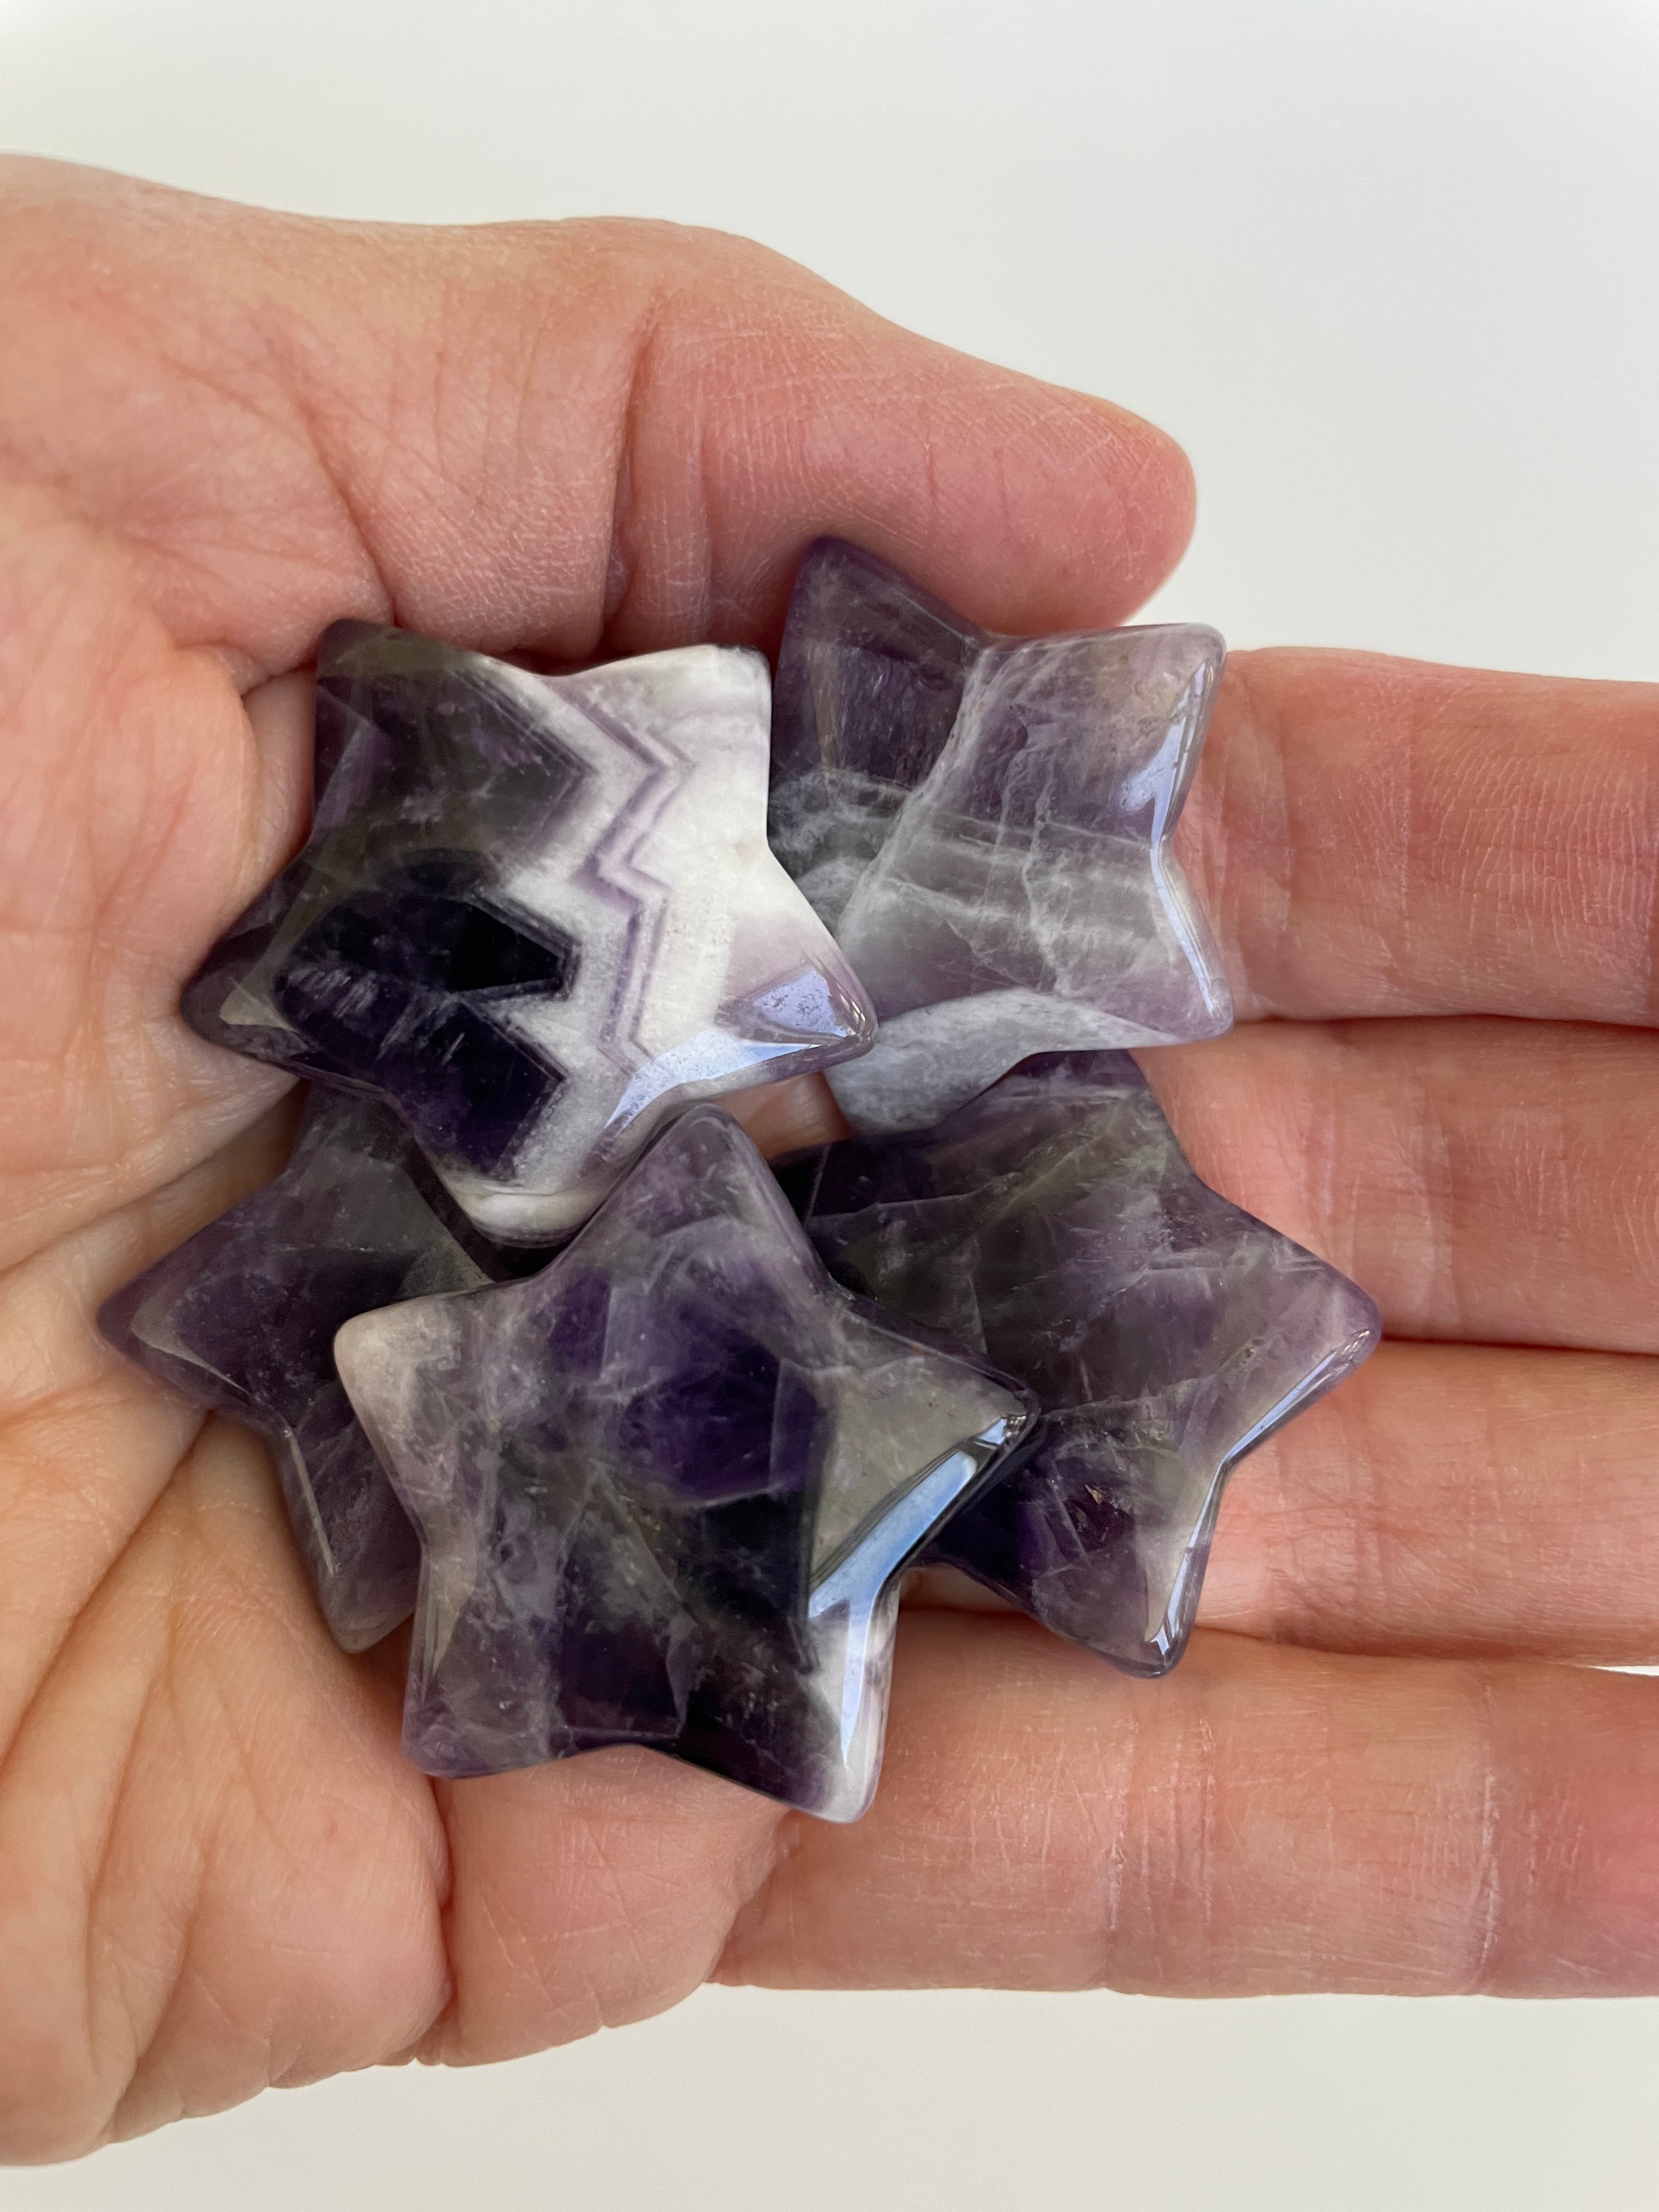 View of several amethyst stars. Love this little chevron amethyst star! It can be used for meditation, healing, for your altar or as décor for any room in your home or office. Easy to slip right into your pocket so you have the energy of amethyst everywhere you go. Approximately 1¼". Cost is $6 for one star.